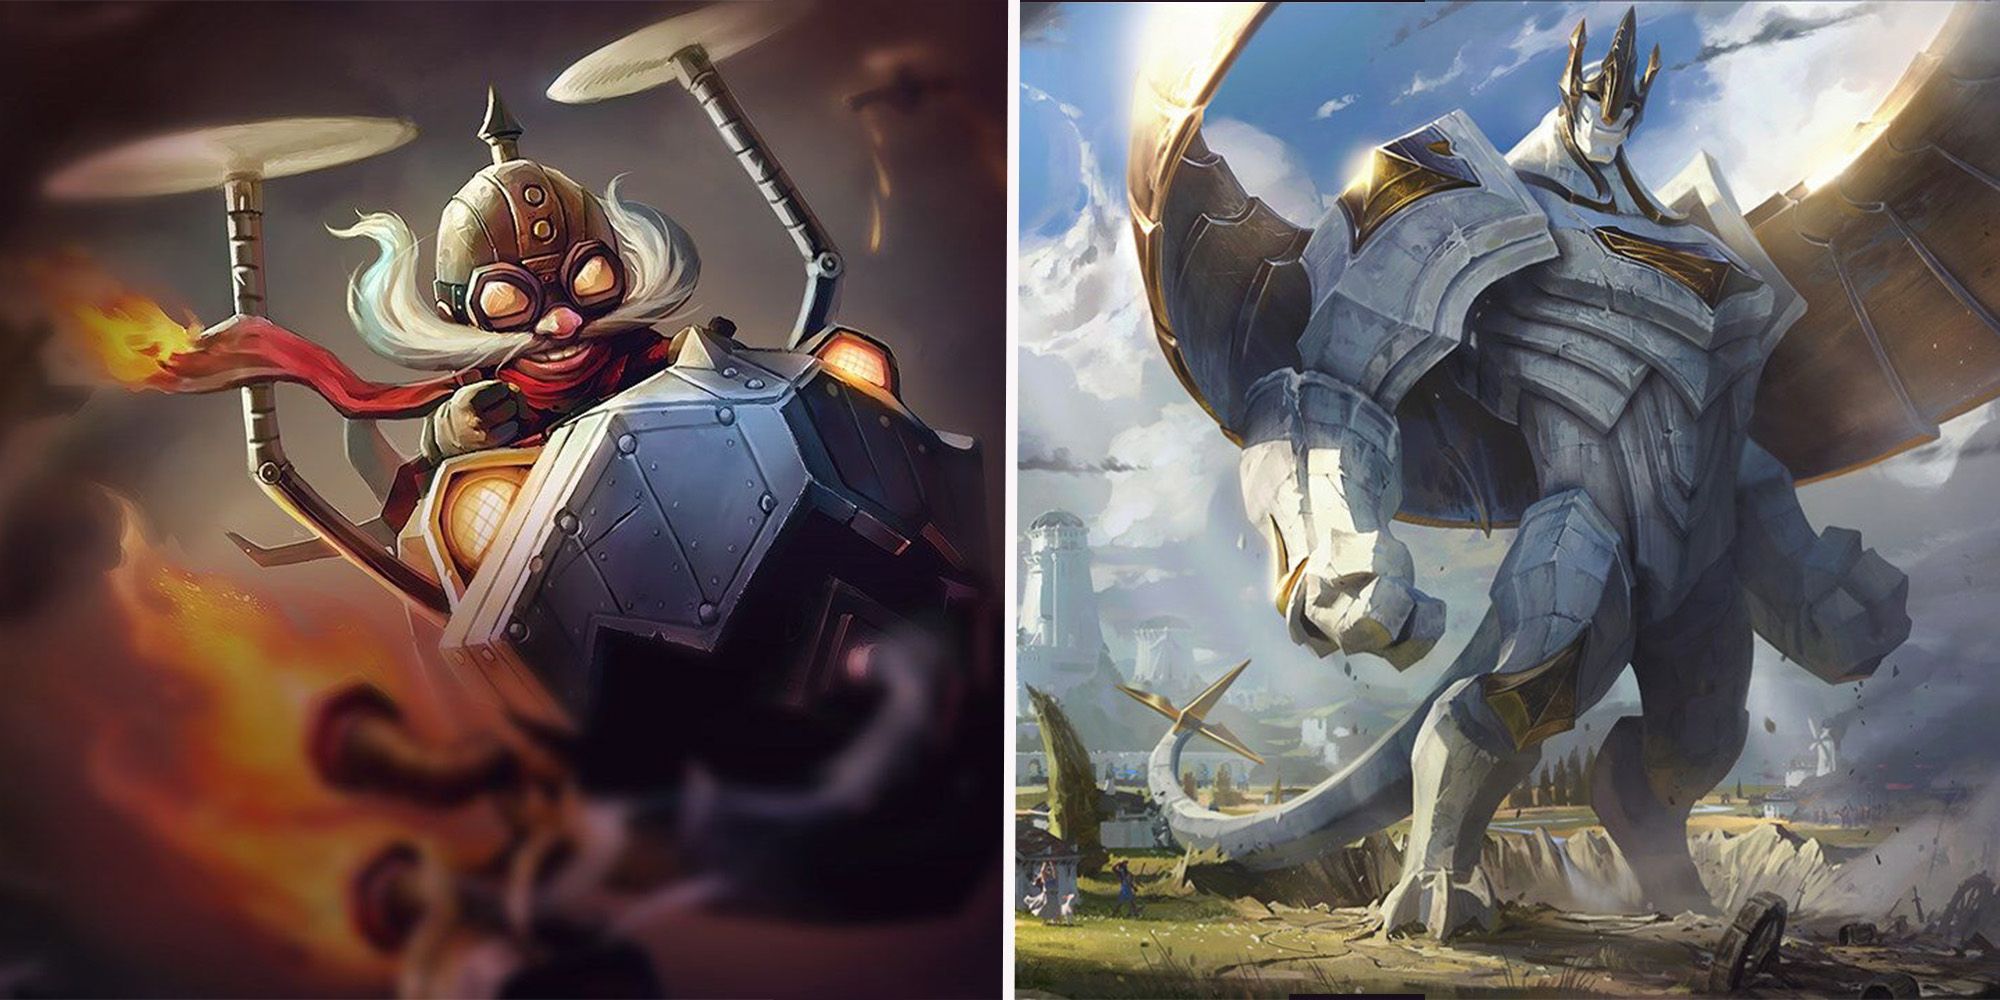 Corki and Galio from League of Legends